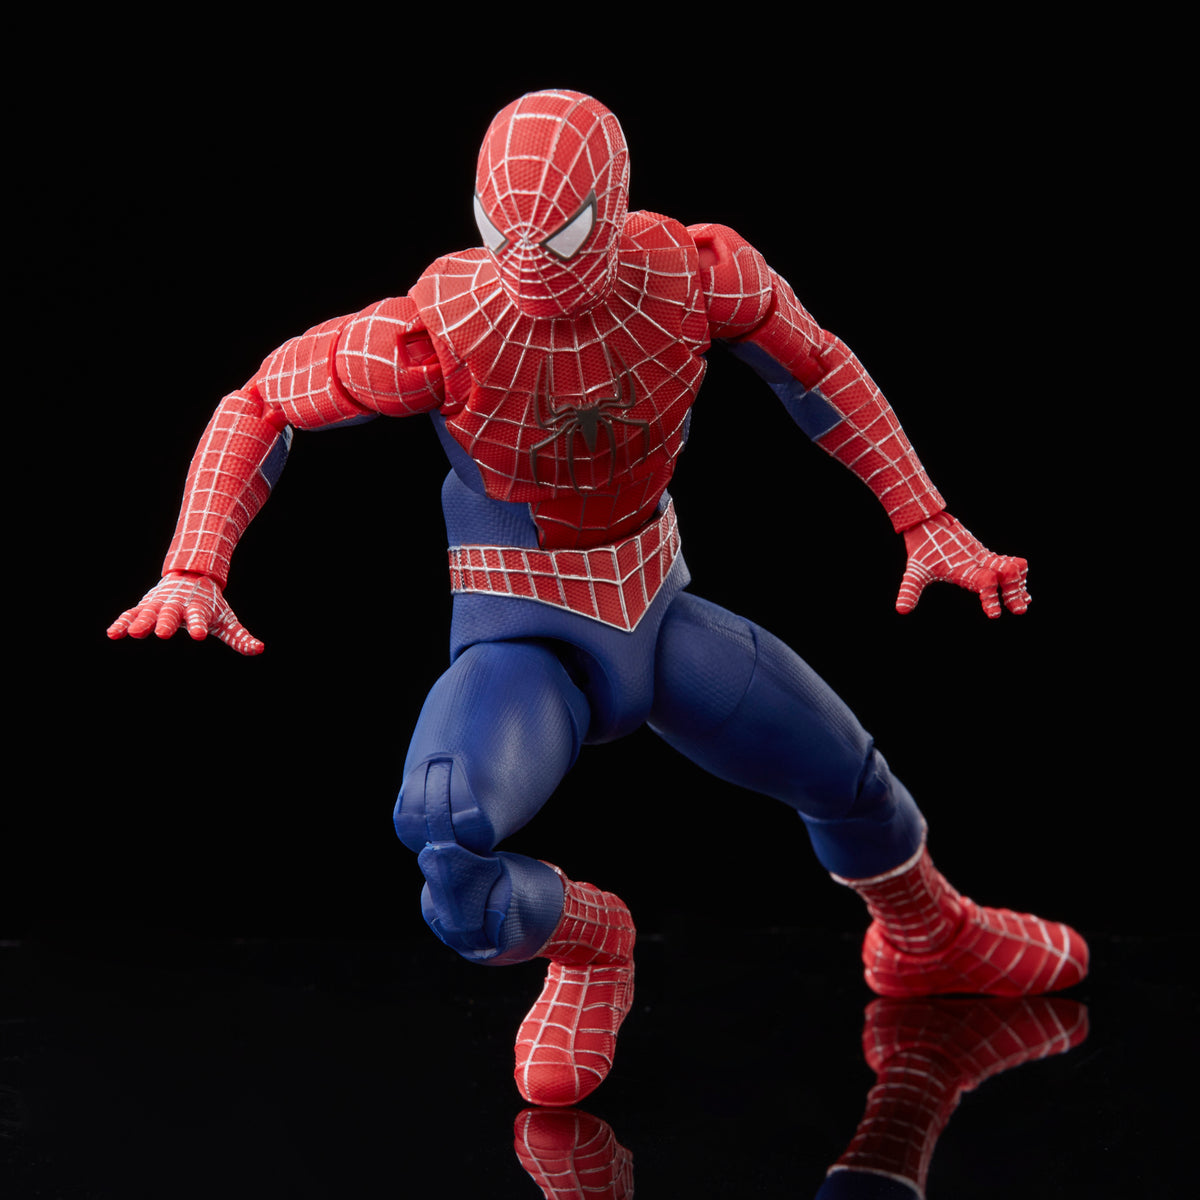 6 Inchpre-Sale Marvel Legends Series Spider-Man: No Way Home: Doc Ock  Action Figure Model Toys Gift Collectibles Original New